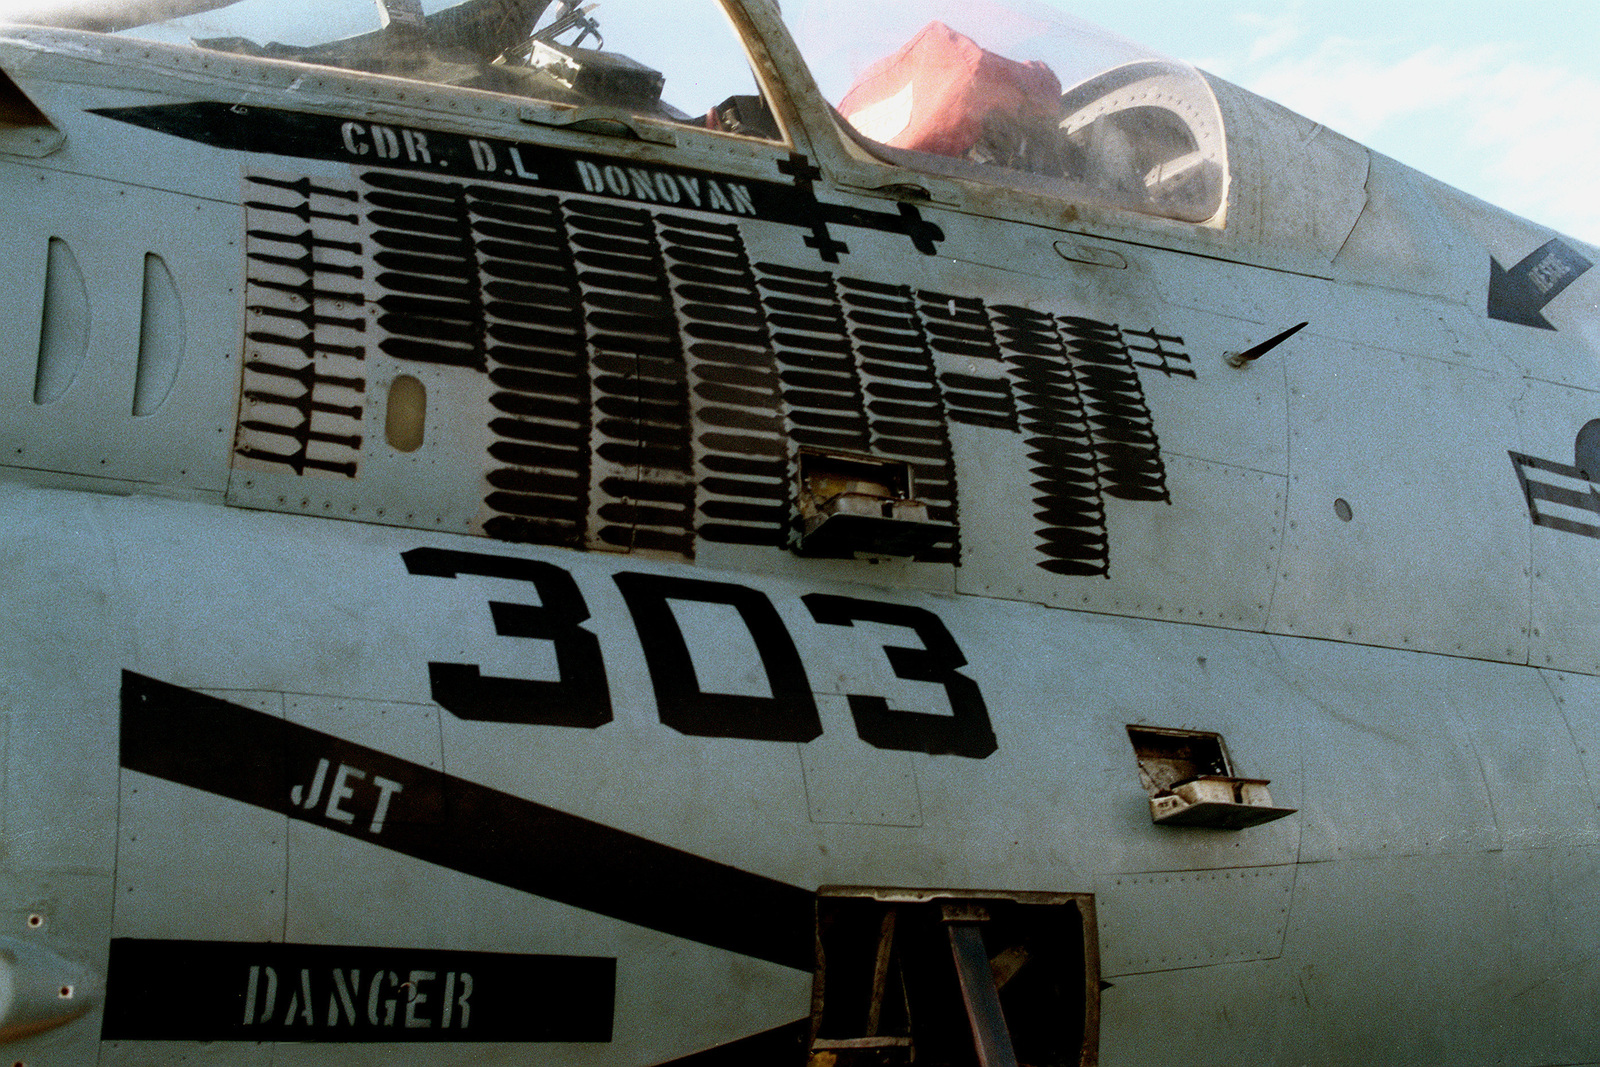 a-close-up-view-of-the-markings-on-the-side-of-an-attack-squadron-42-va-42-bb8a35-1600.jpg